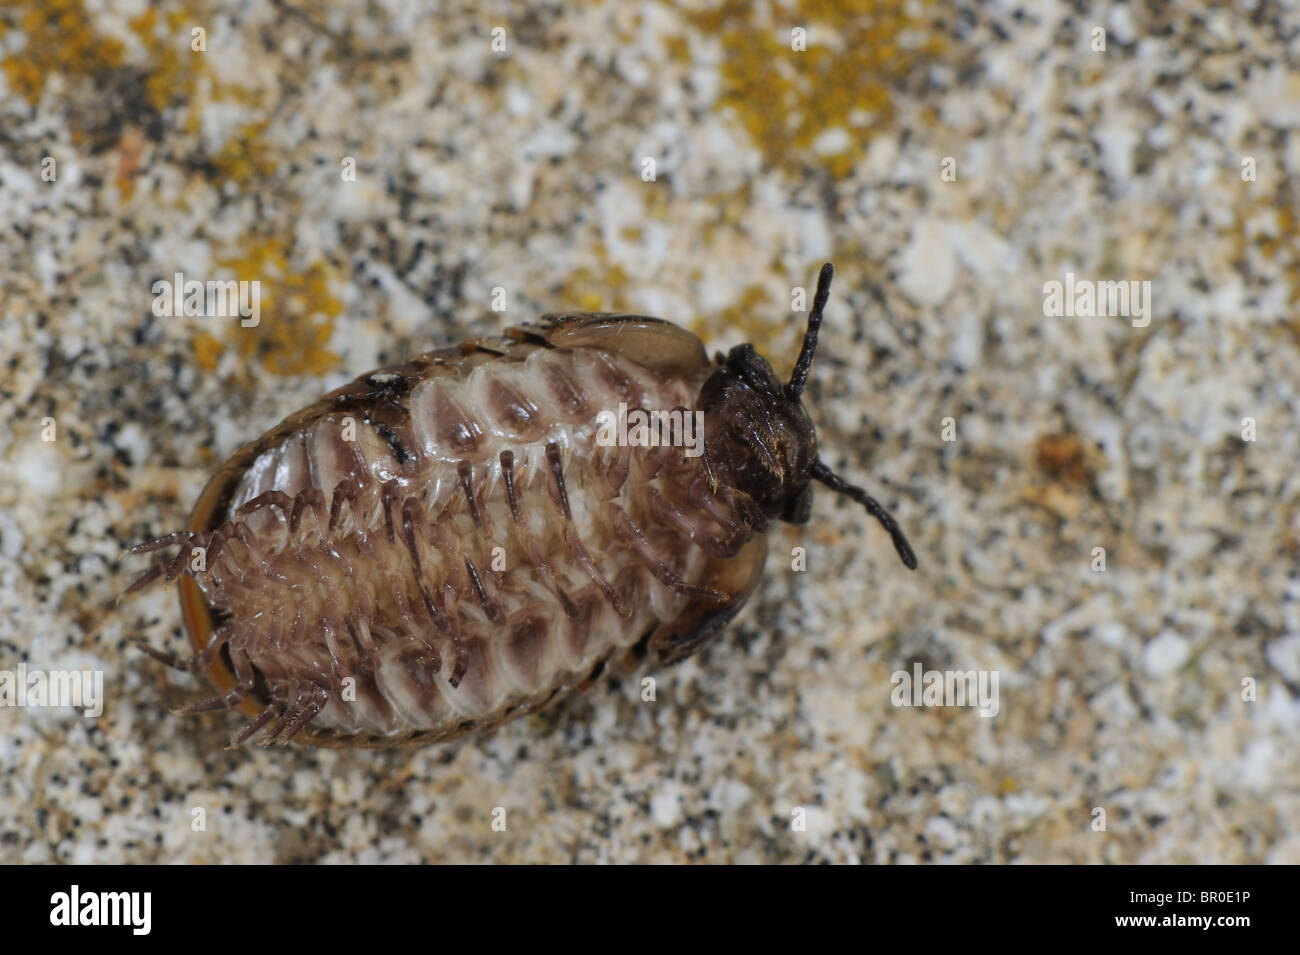 Pill millipede (Glomeris marginata) underside view showing the many pairs of legs - Vaucluse - Provence - France Stock Photo